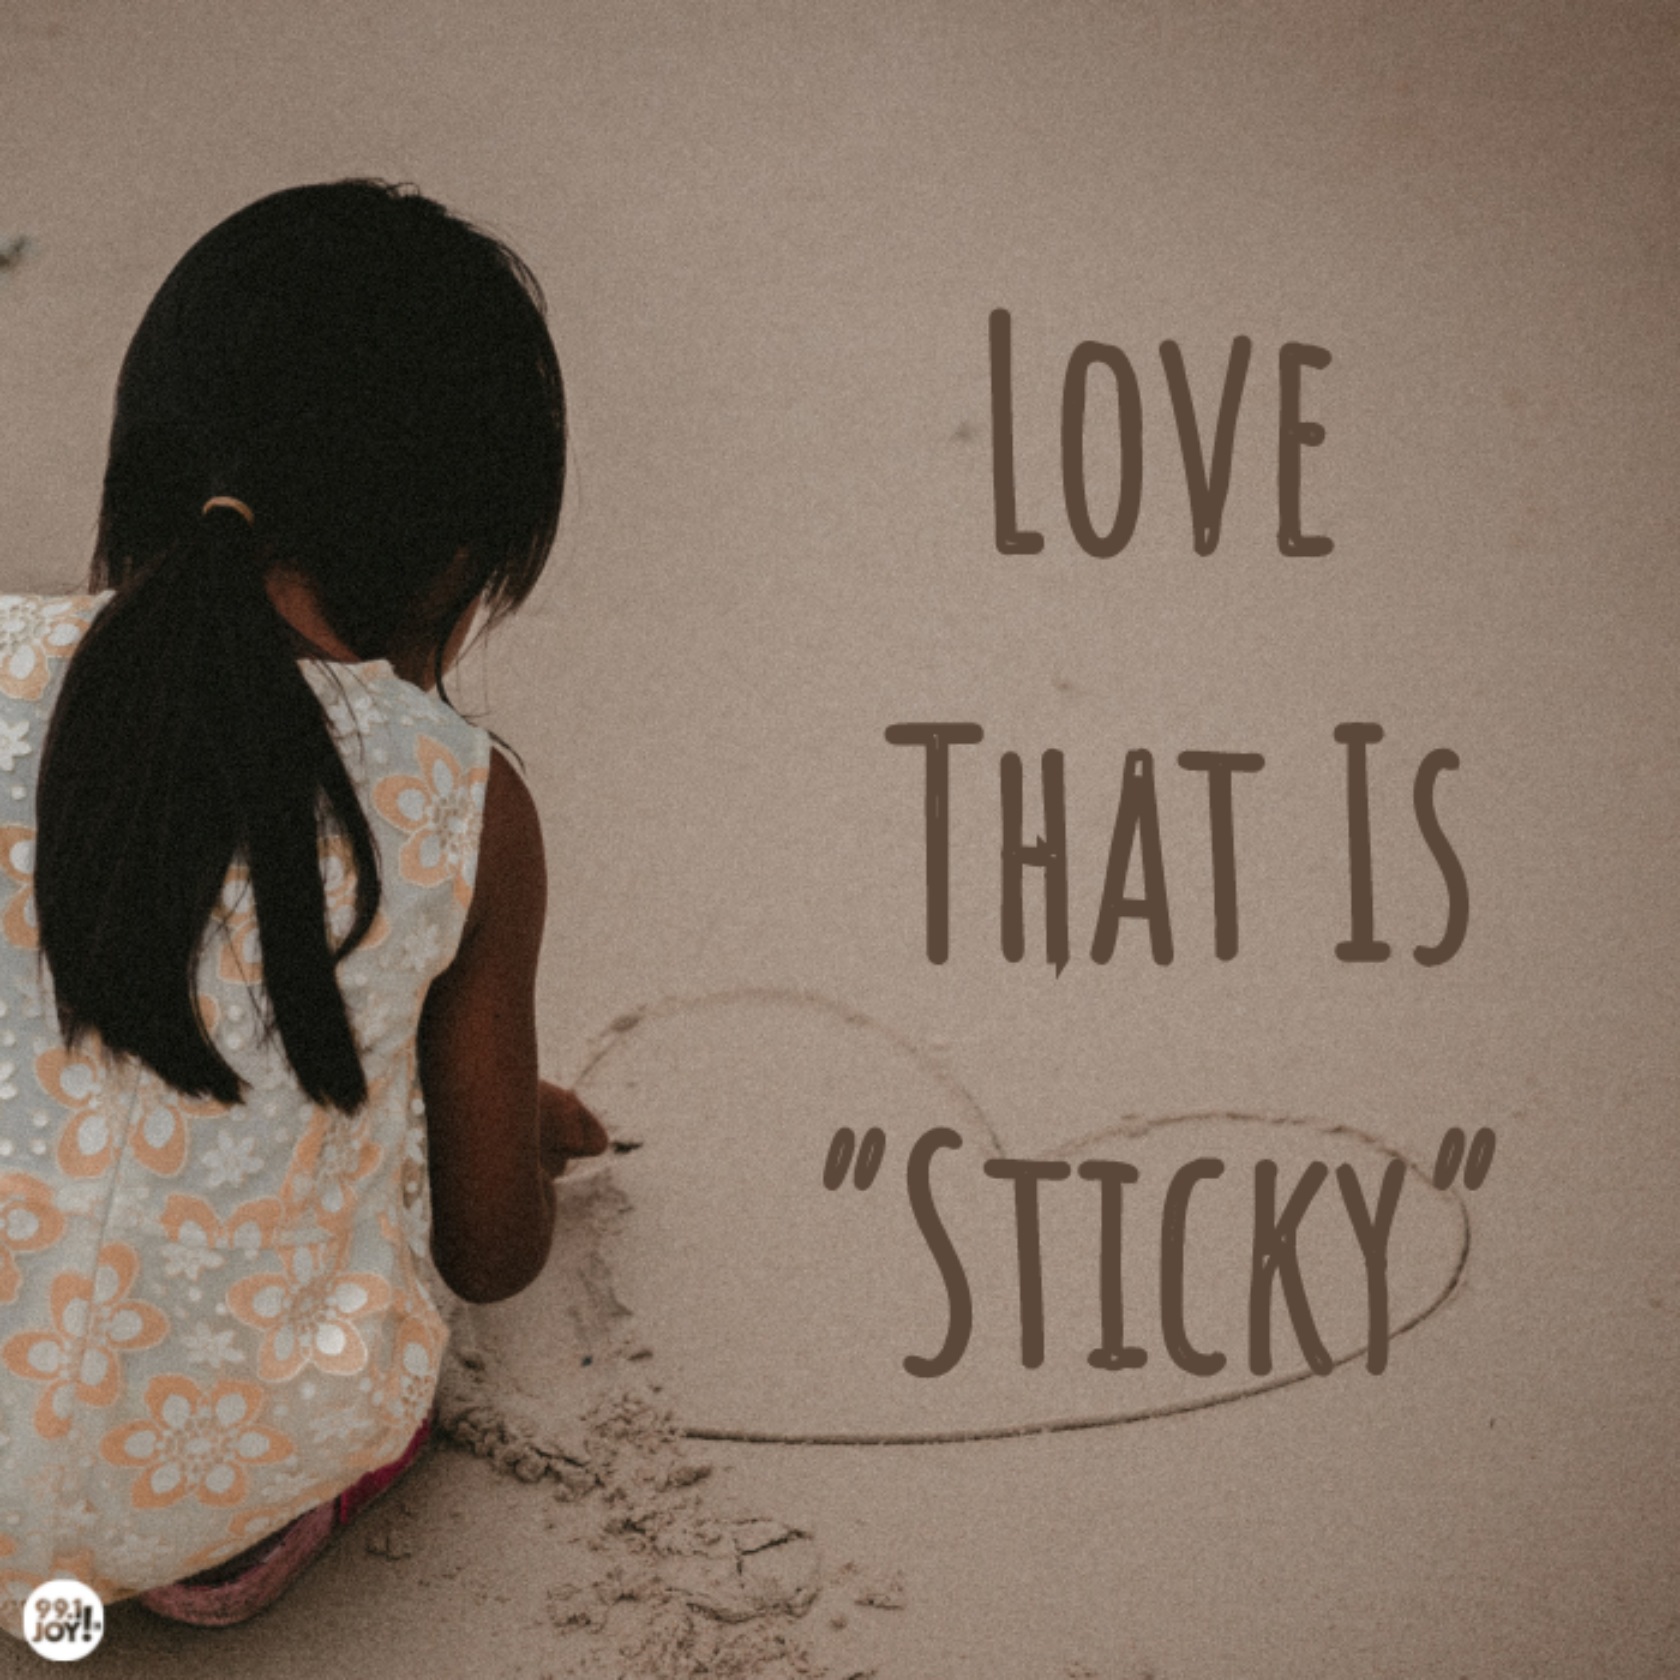 Love That Is “Sticky”